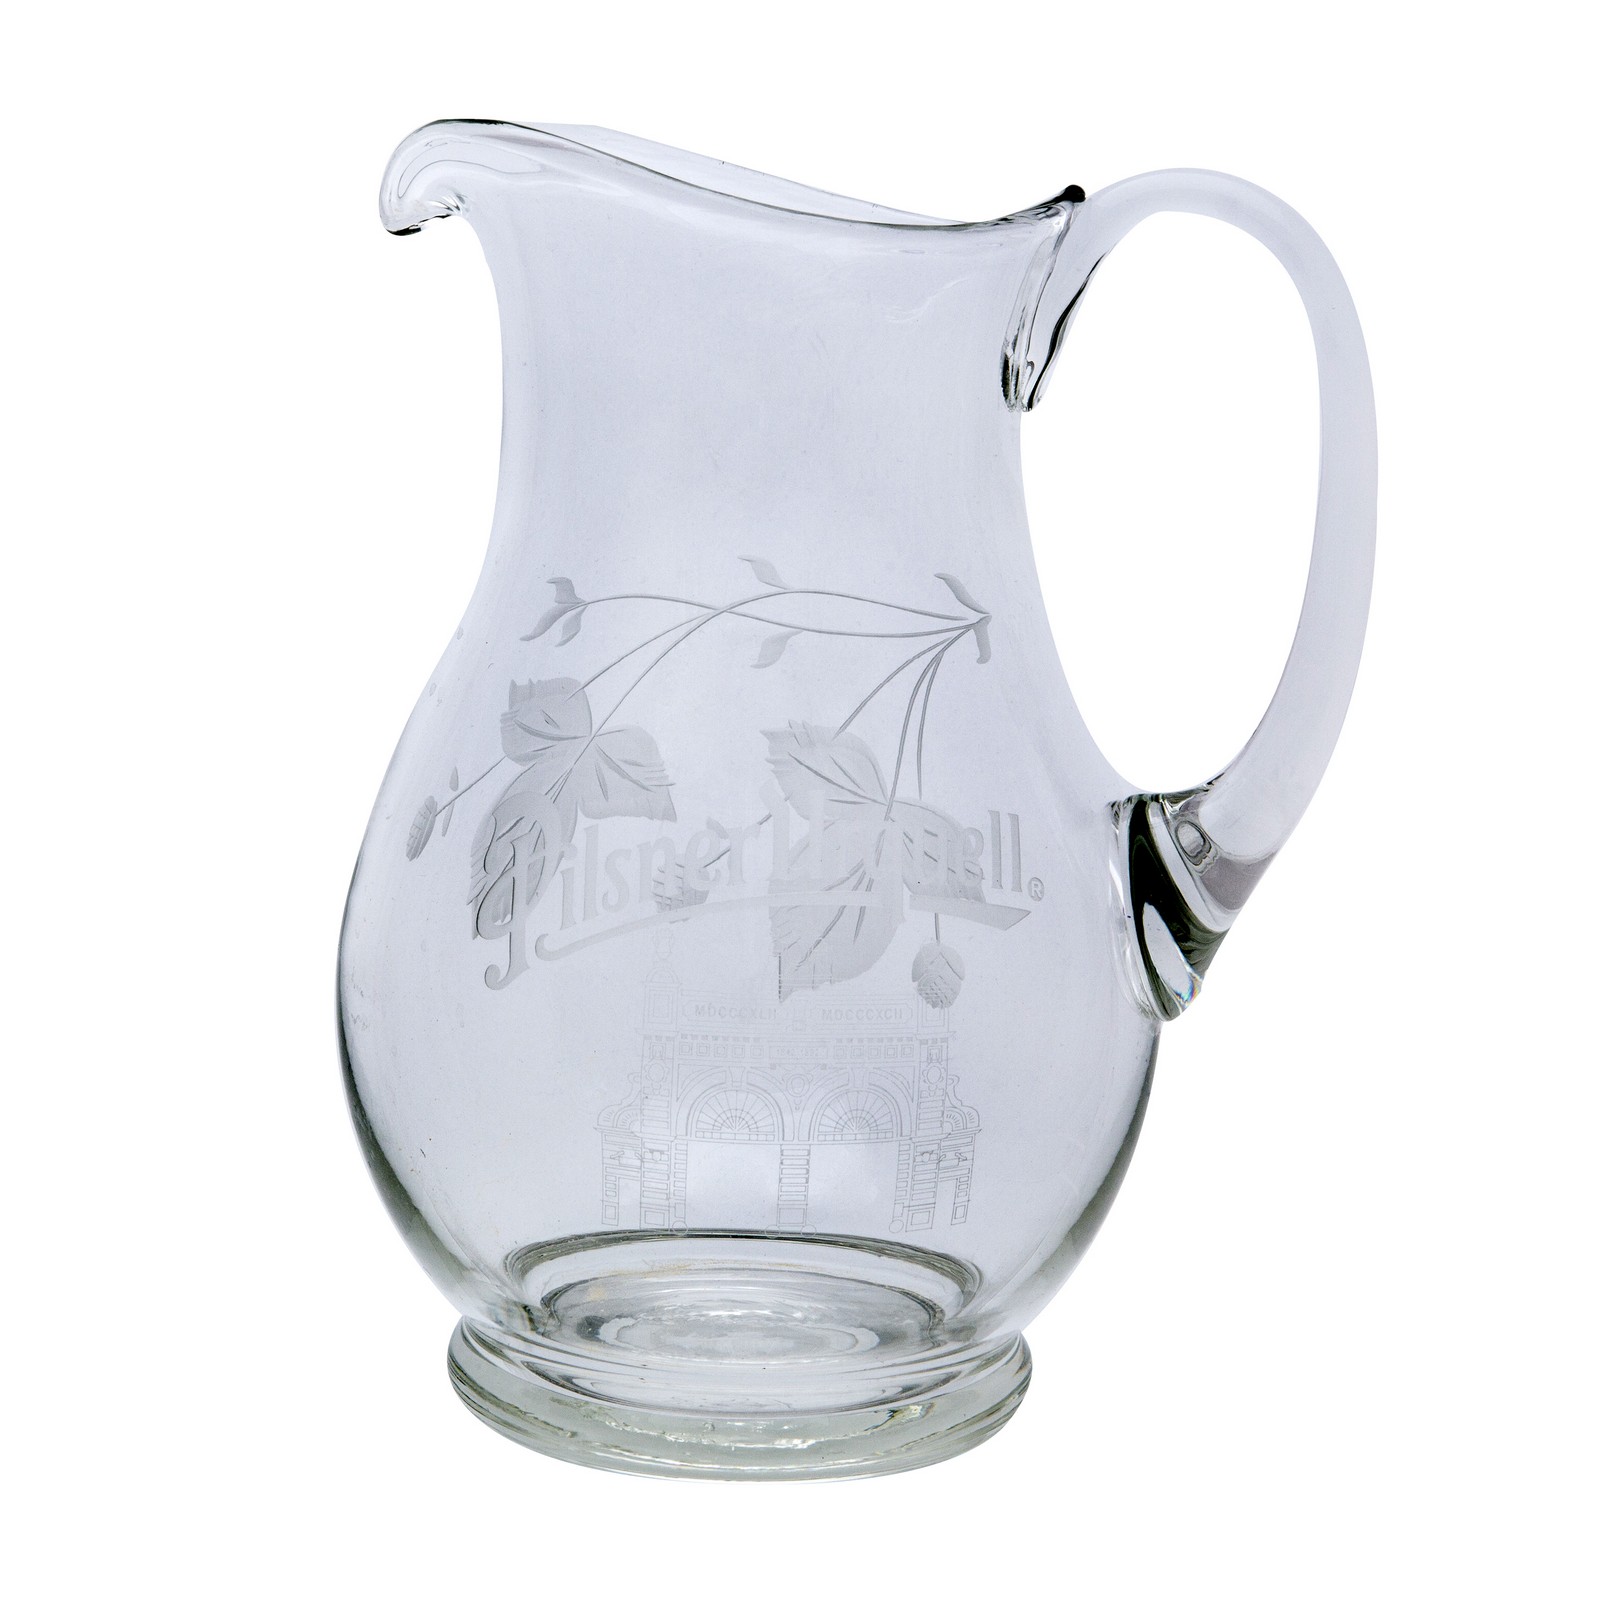 Engraved pitcher with hops - large